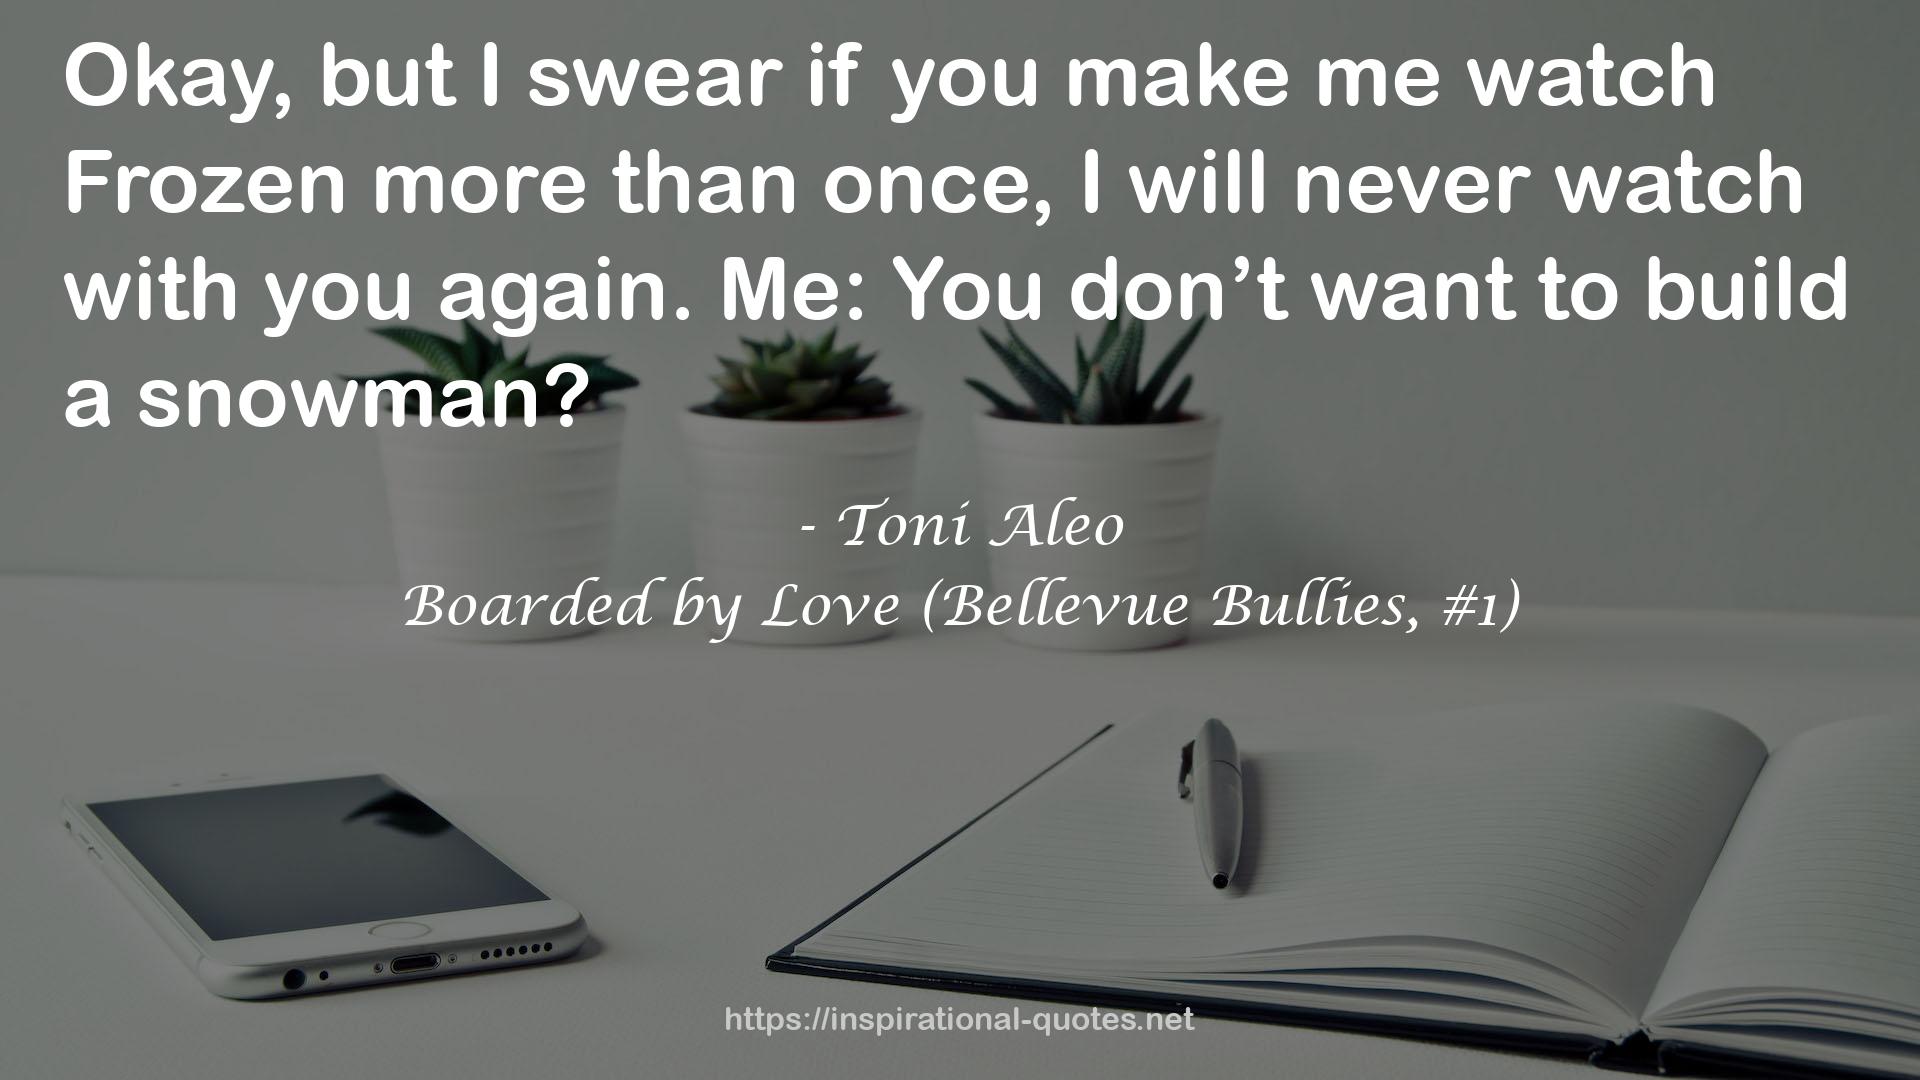 Boarded by Love (Bellevue Bullies, #1) QUOTES